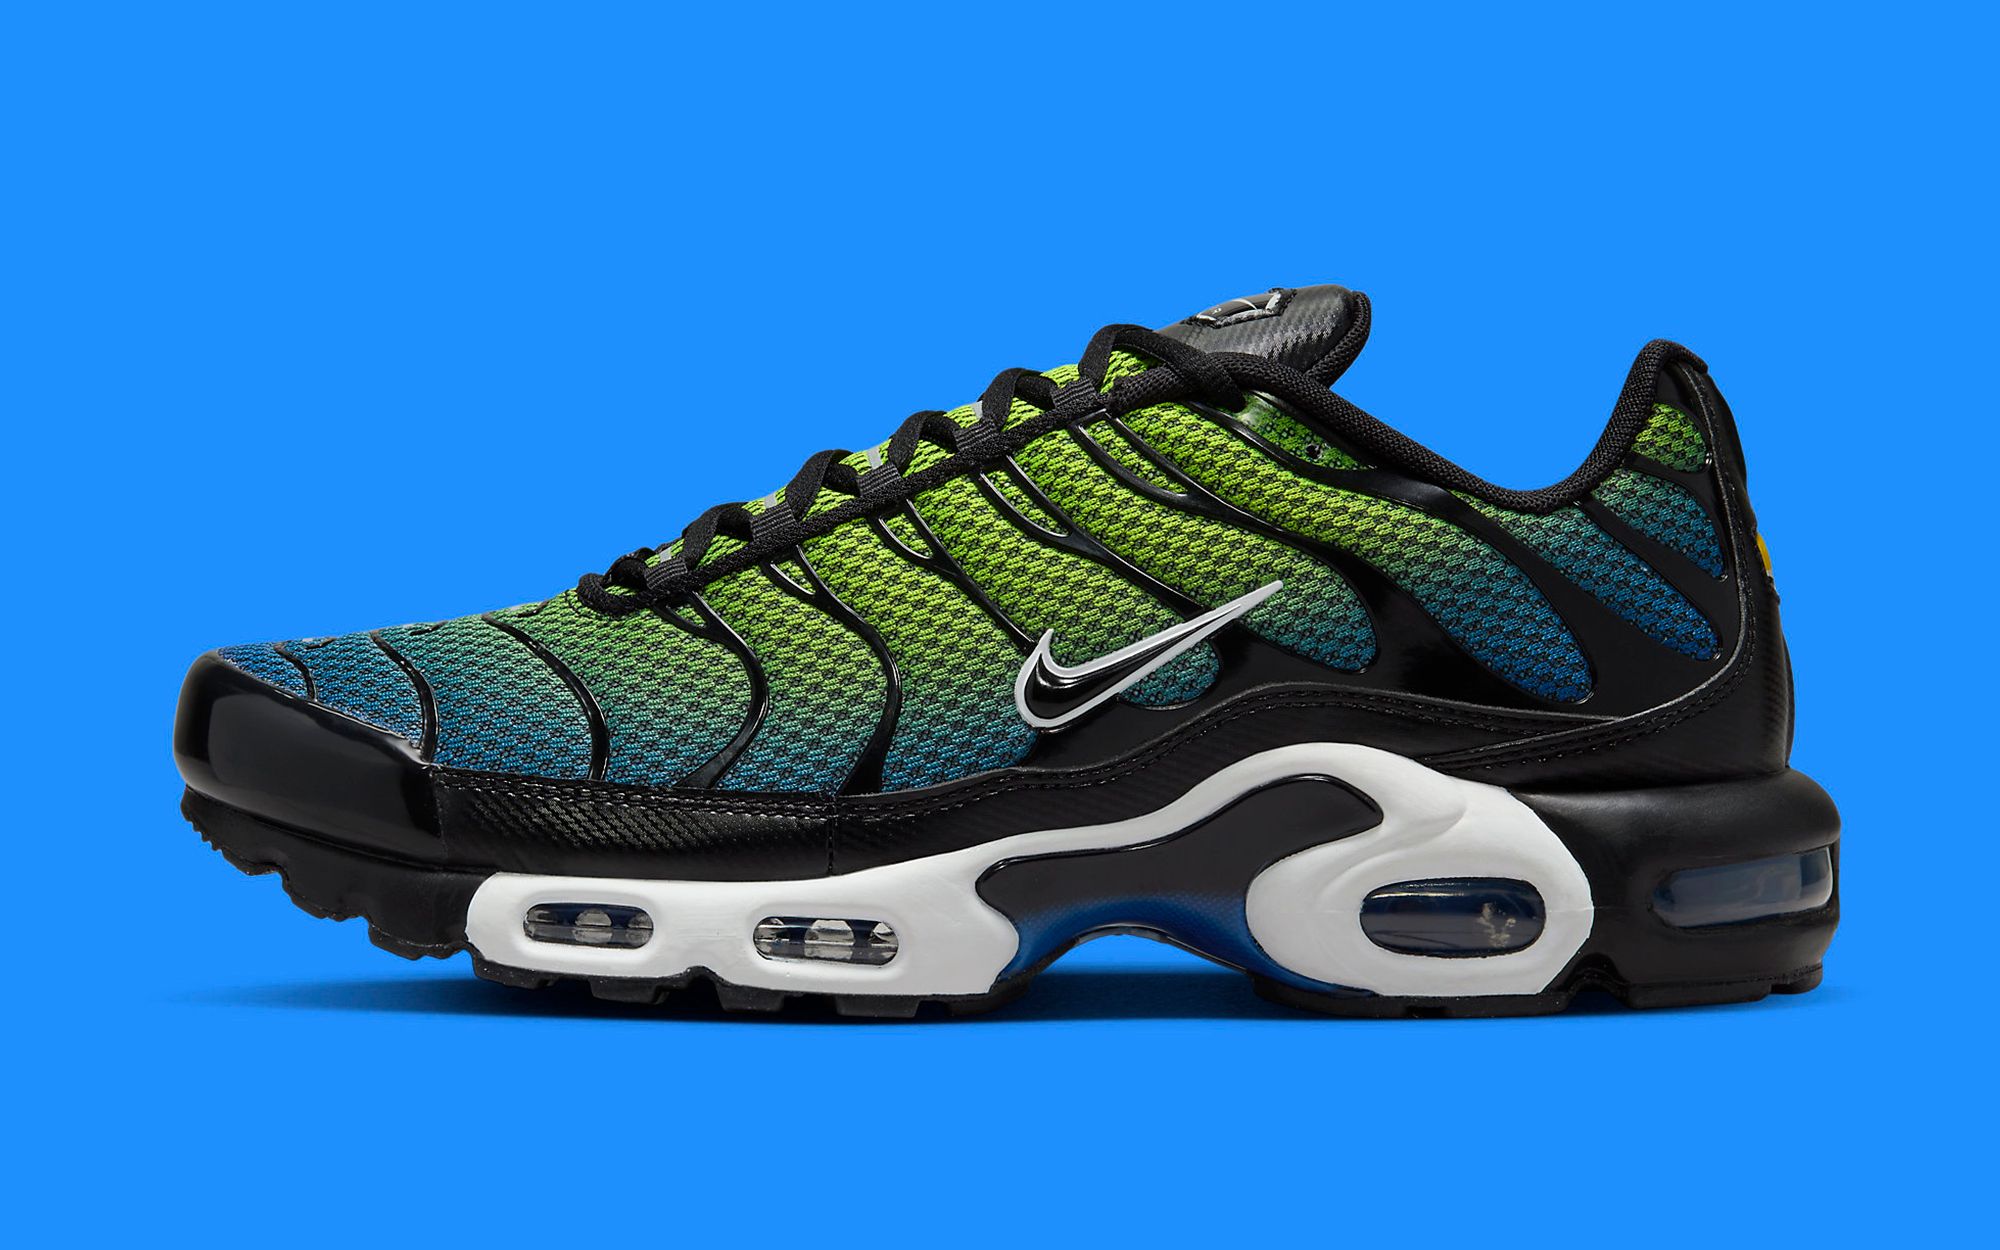 The Nike Air Max Plus Surfaces in 